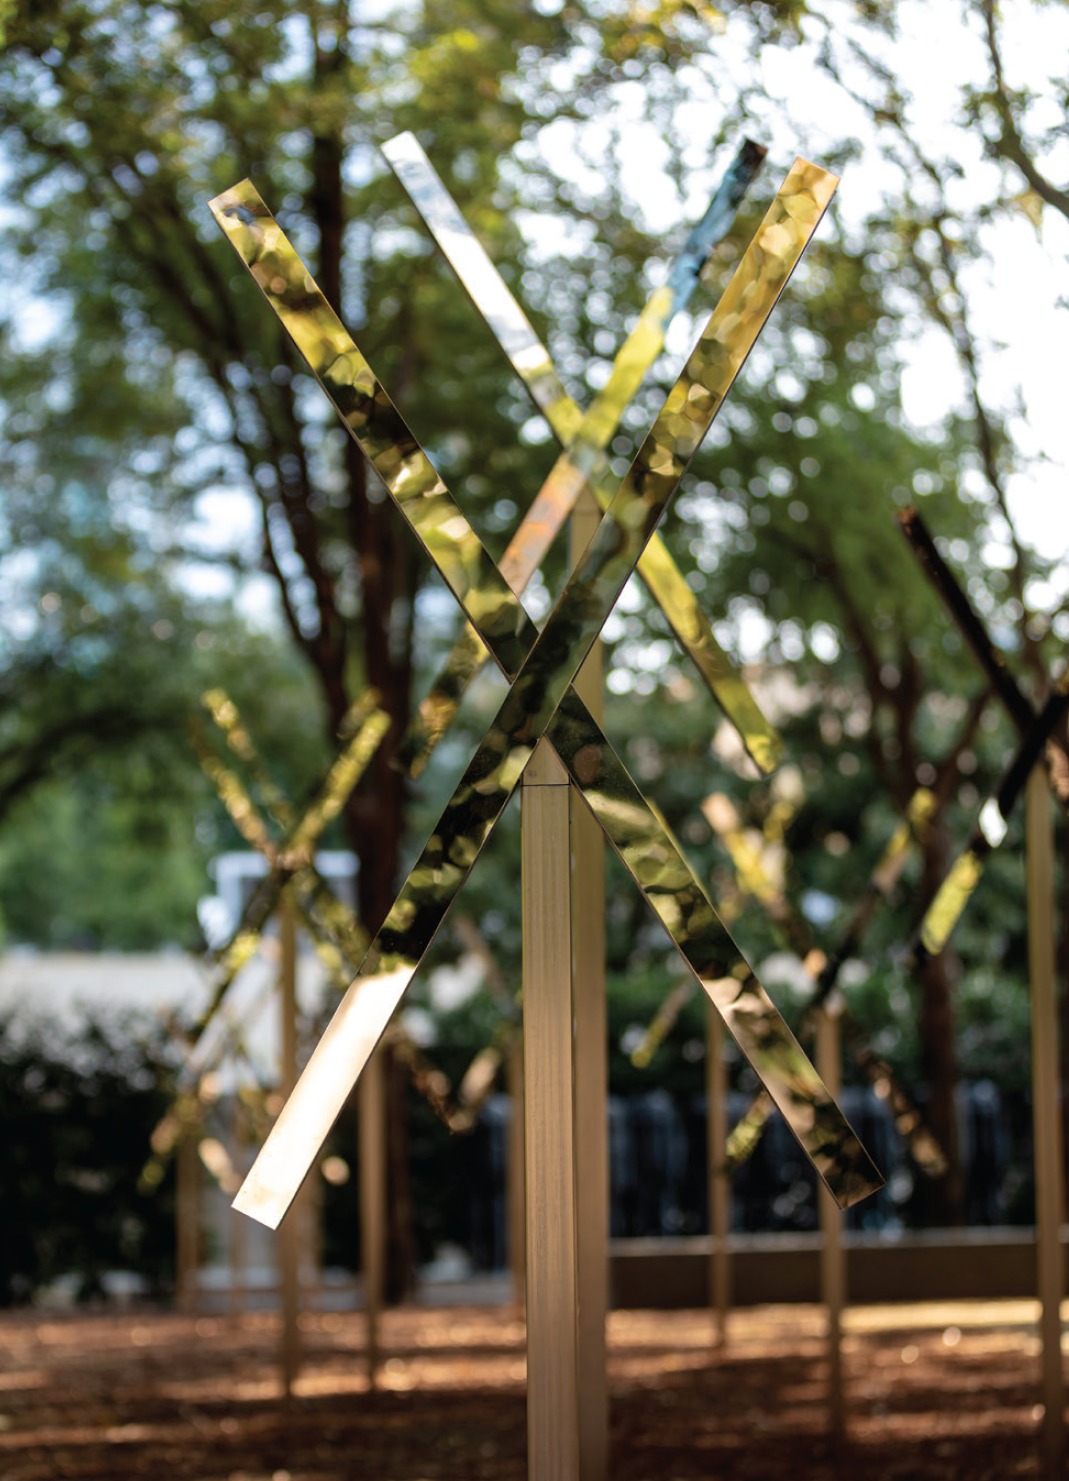 Mirrored x-shaped installations sit atop stainless steel posts marking the route of an underground stream in the Nasher Garden.